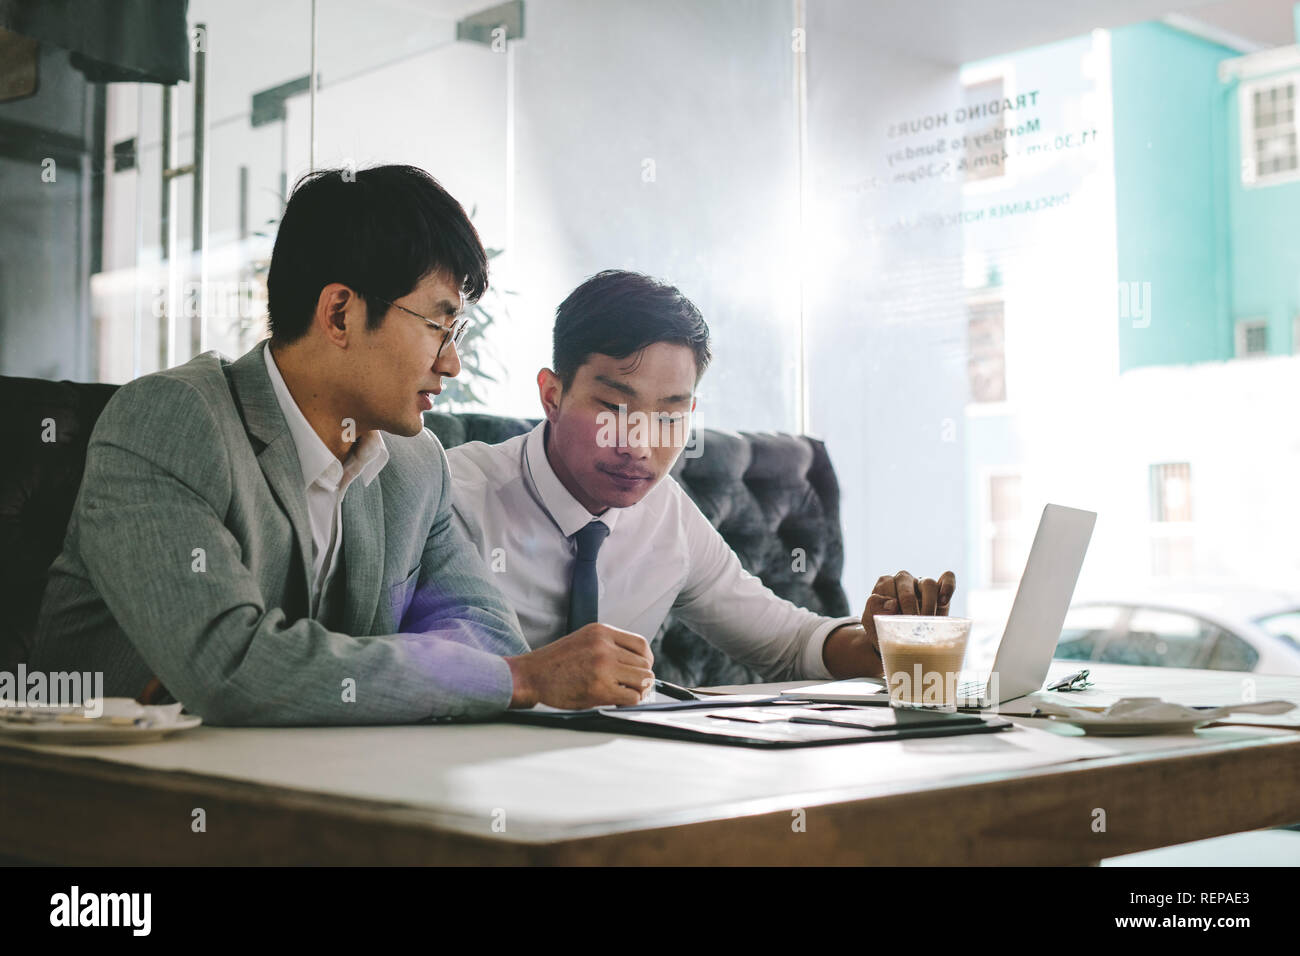 Two asian business men working together in a coffee shop. Business colleagues sitting at coffee shop table analysing some documents. Stock Photo